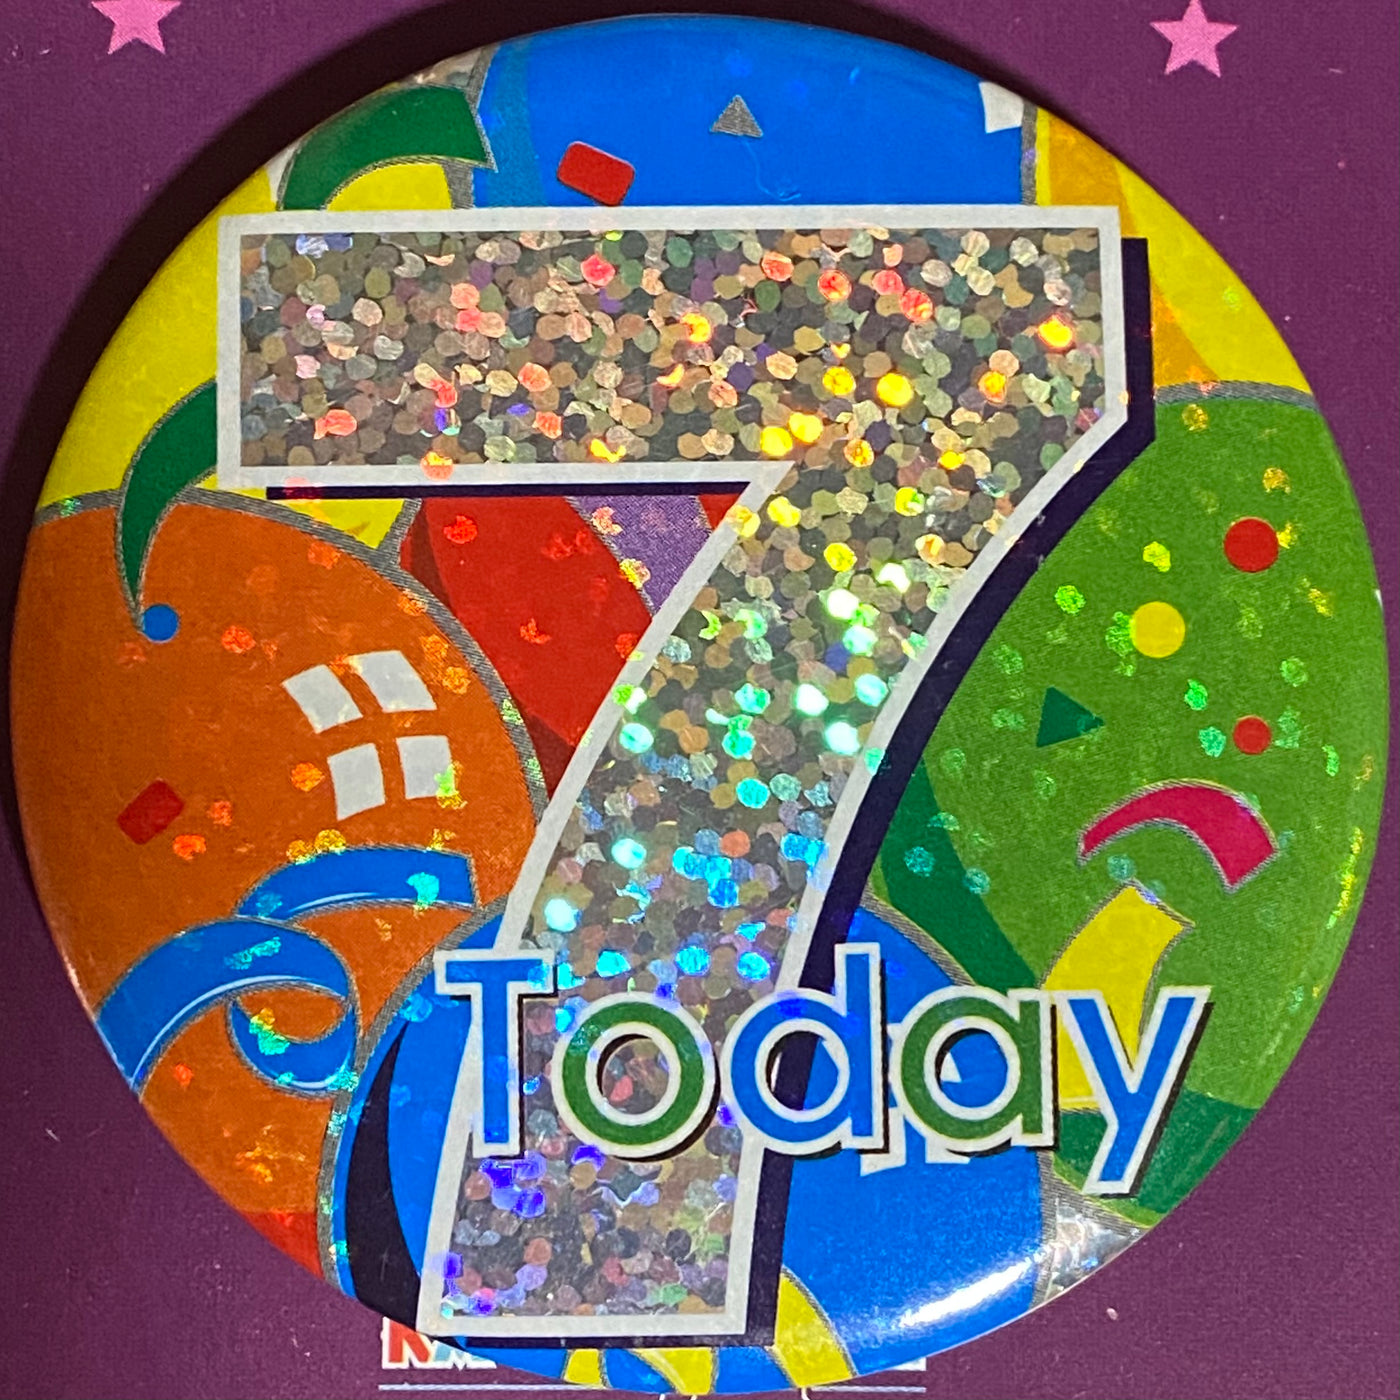 7 Today Balloons Badge